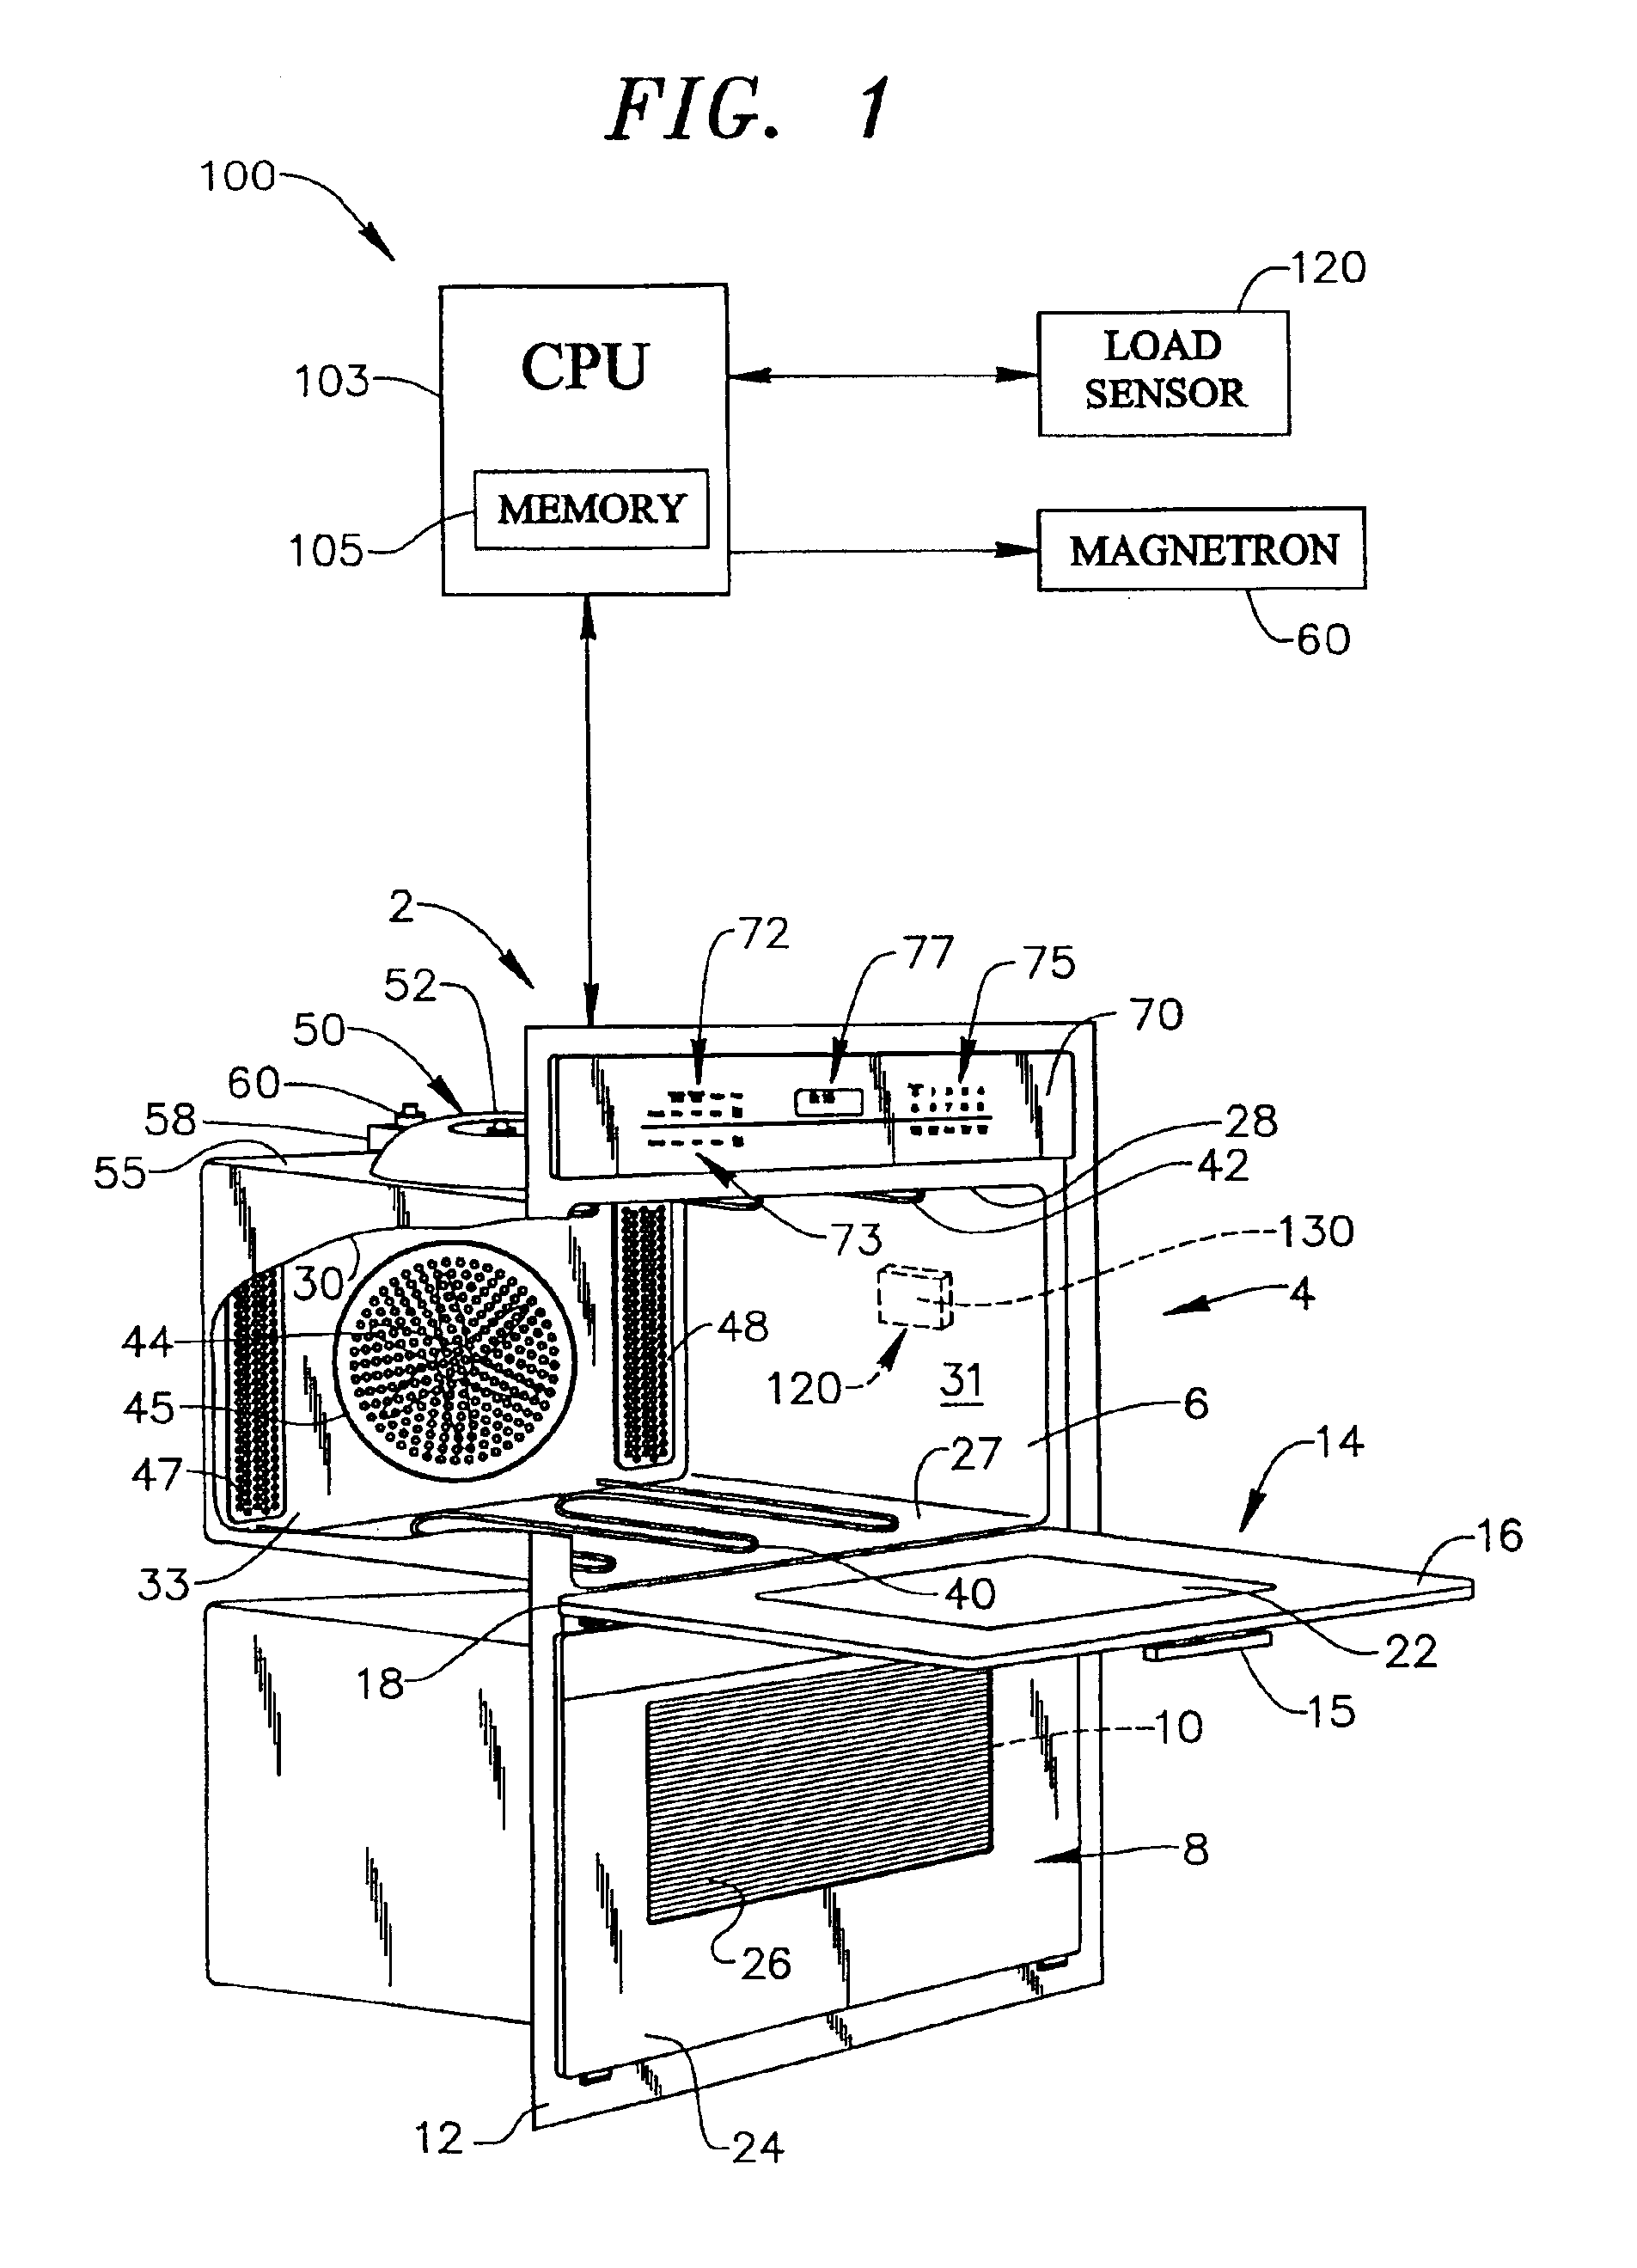 System for sensing the presence of a load in an oven cavity of a microwave cooking appliance